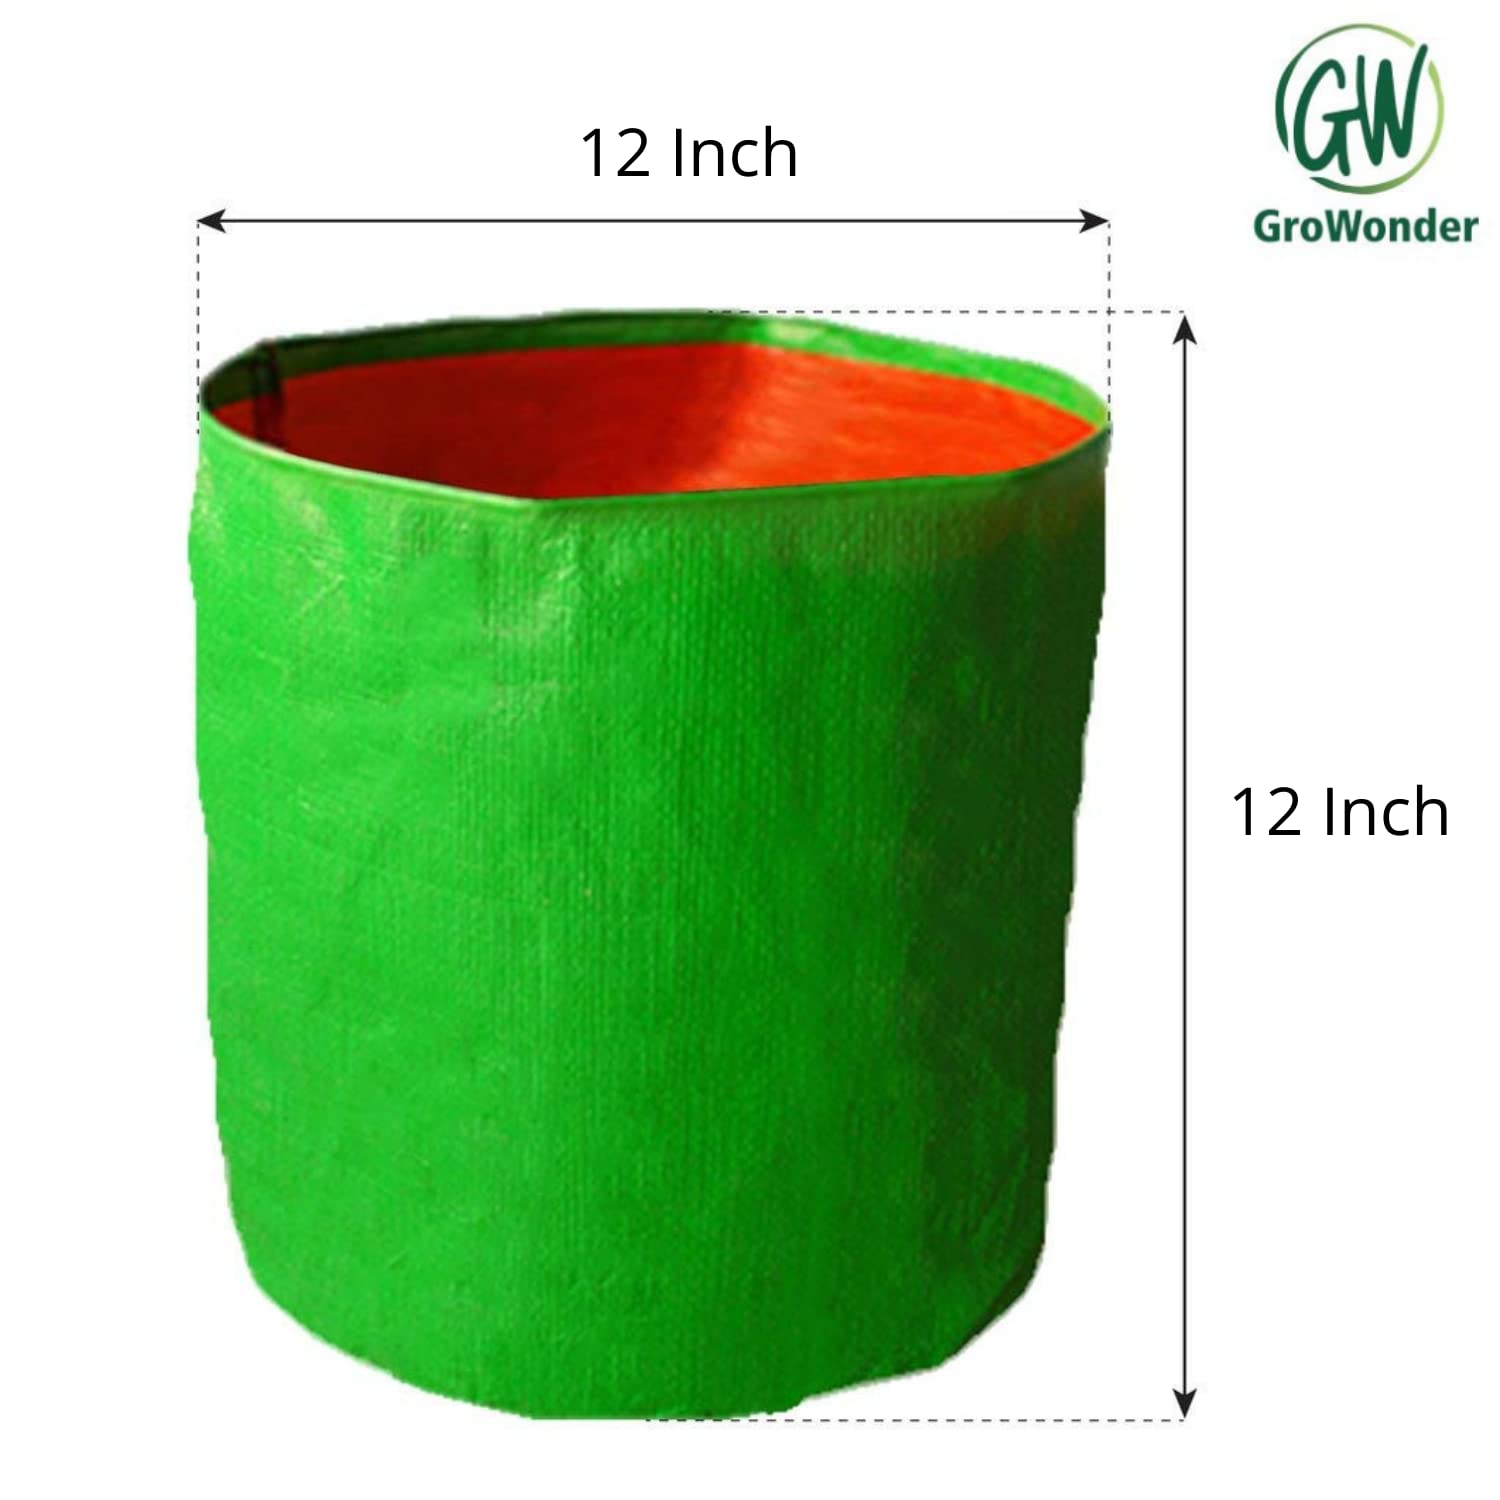 GroWonder Plants Grow Bags 12in x 12in, Grow Bags for Vegetables, Grow Bags for Terrace Garden -Pack of 10